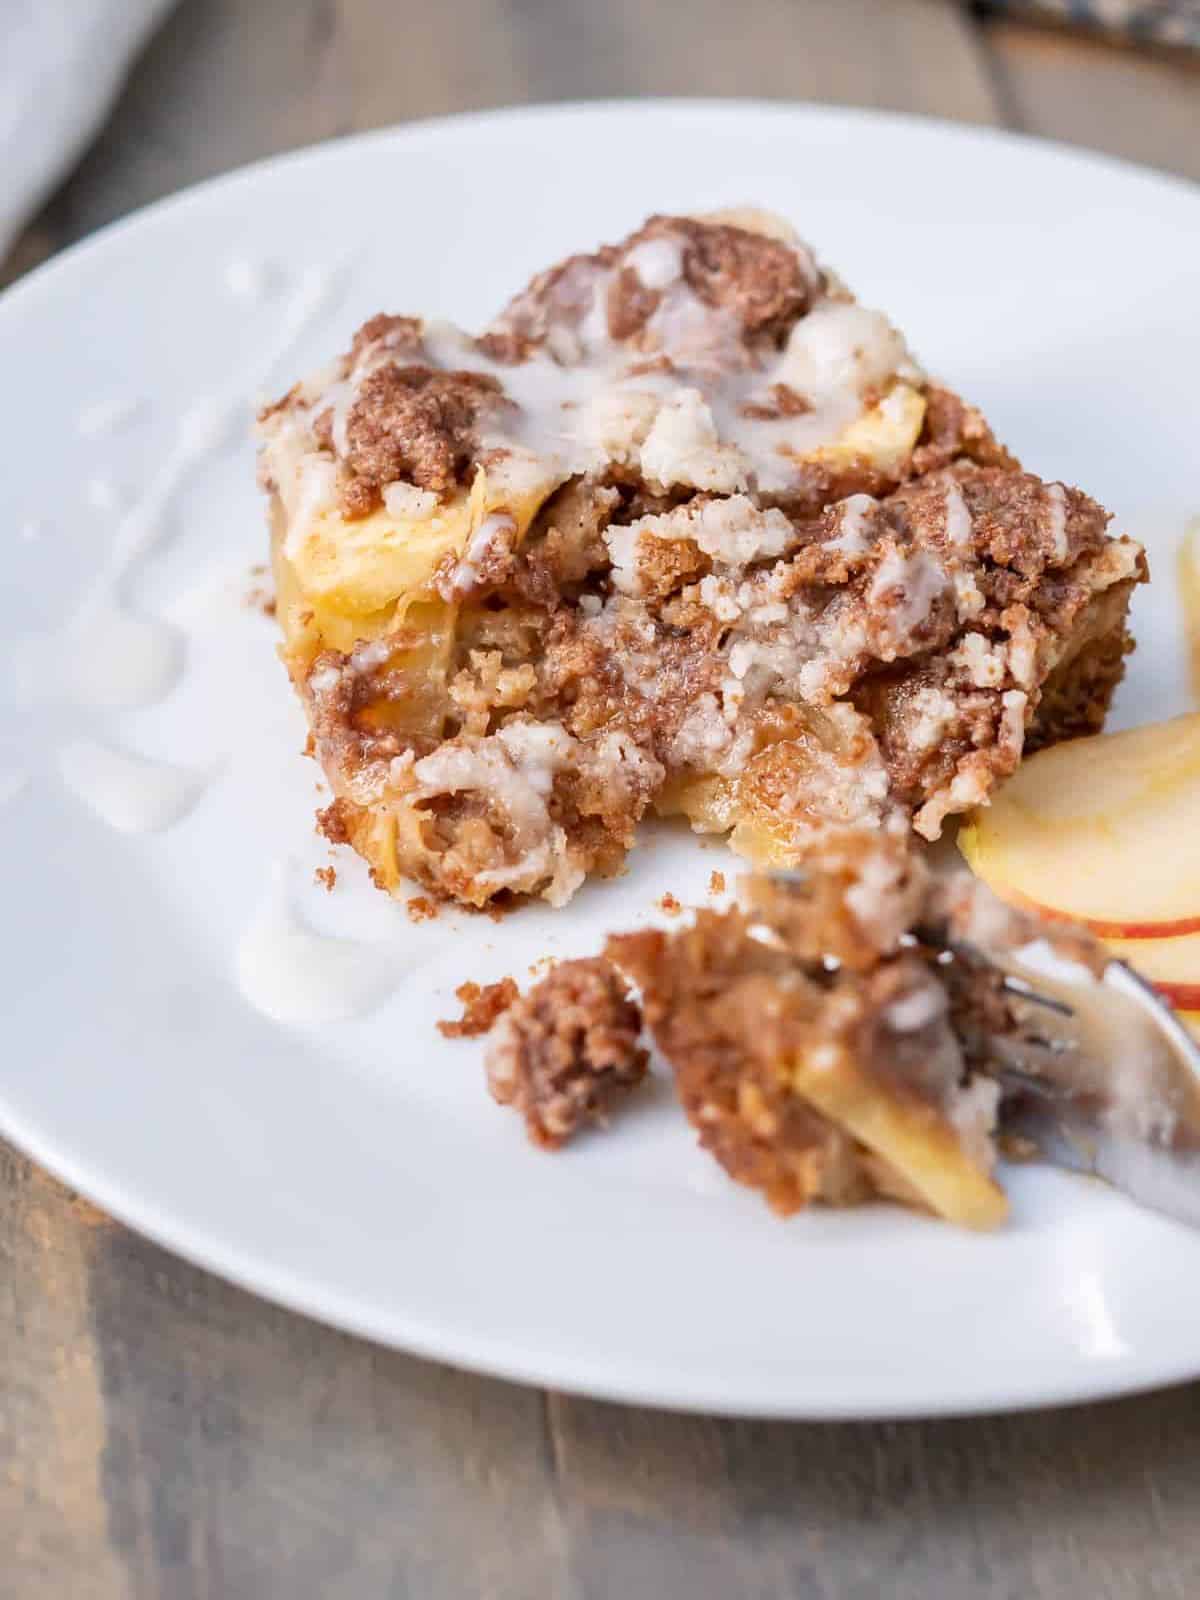 a slice of gluten free apple coffee cake on a plate.